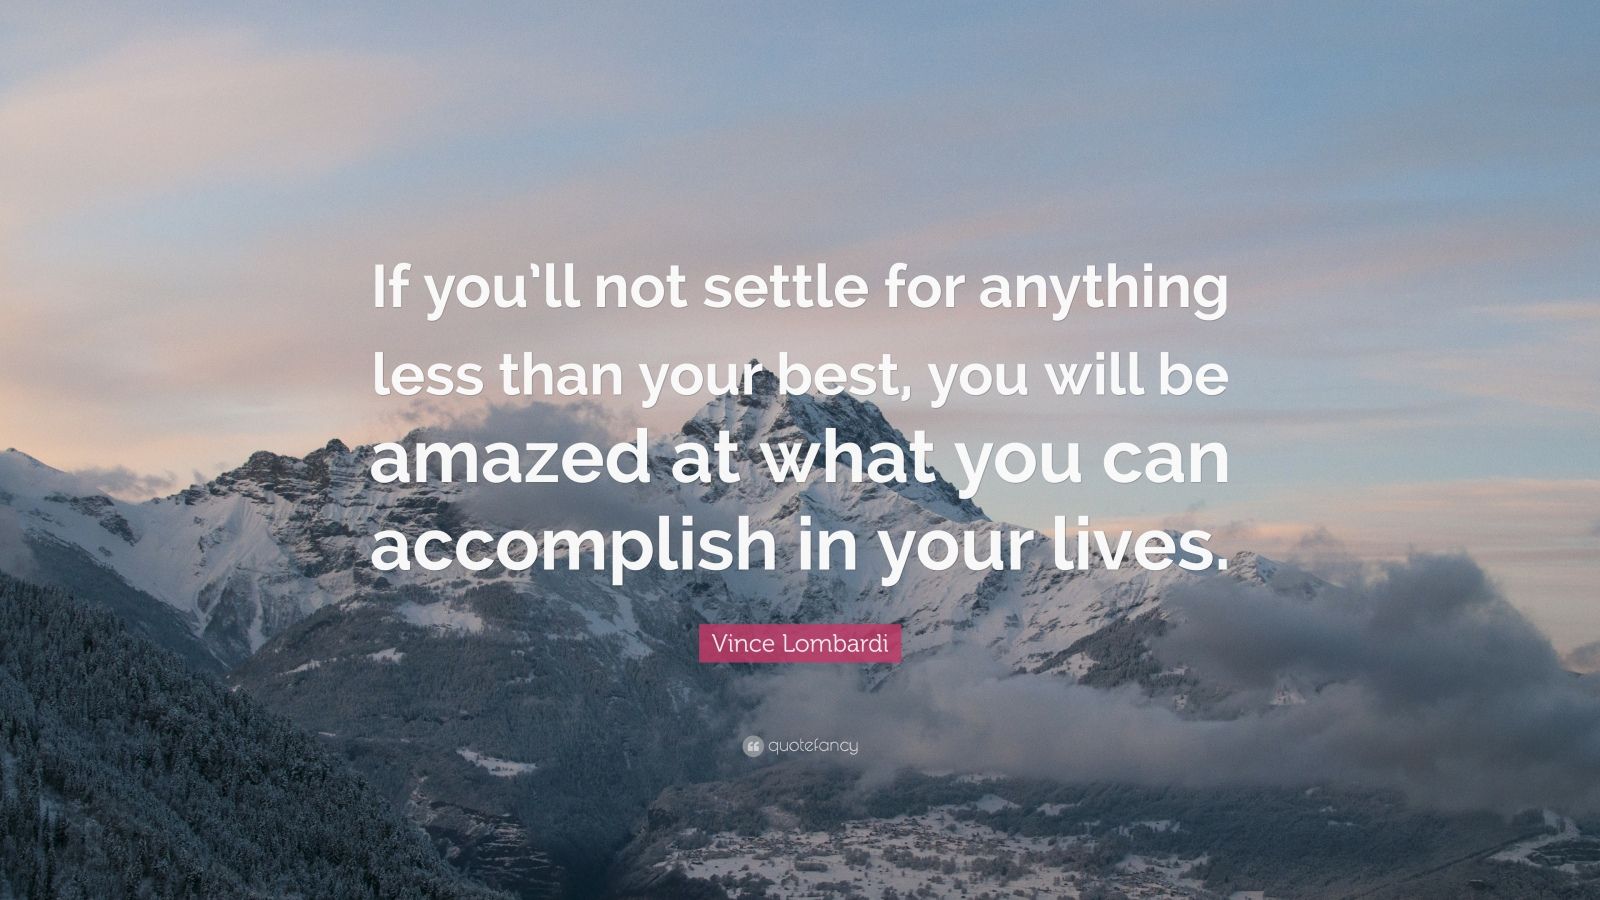 Vince Lombardi Quote: “If you’ll not settle for anything less than your ...